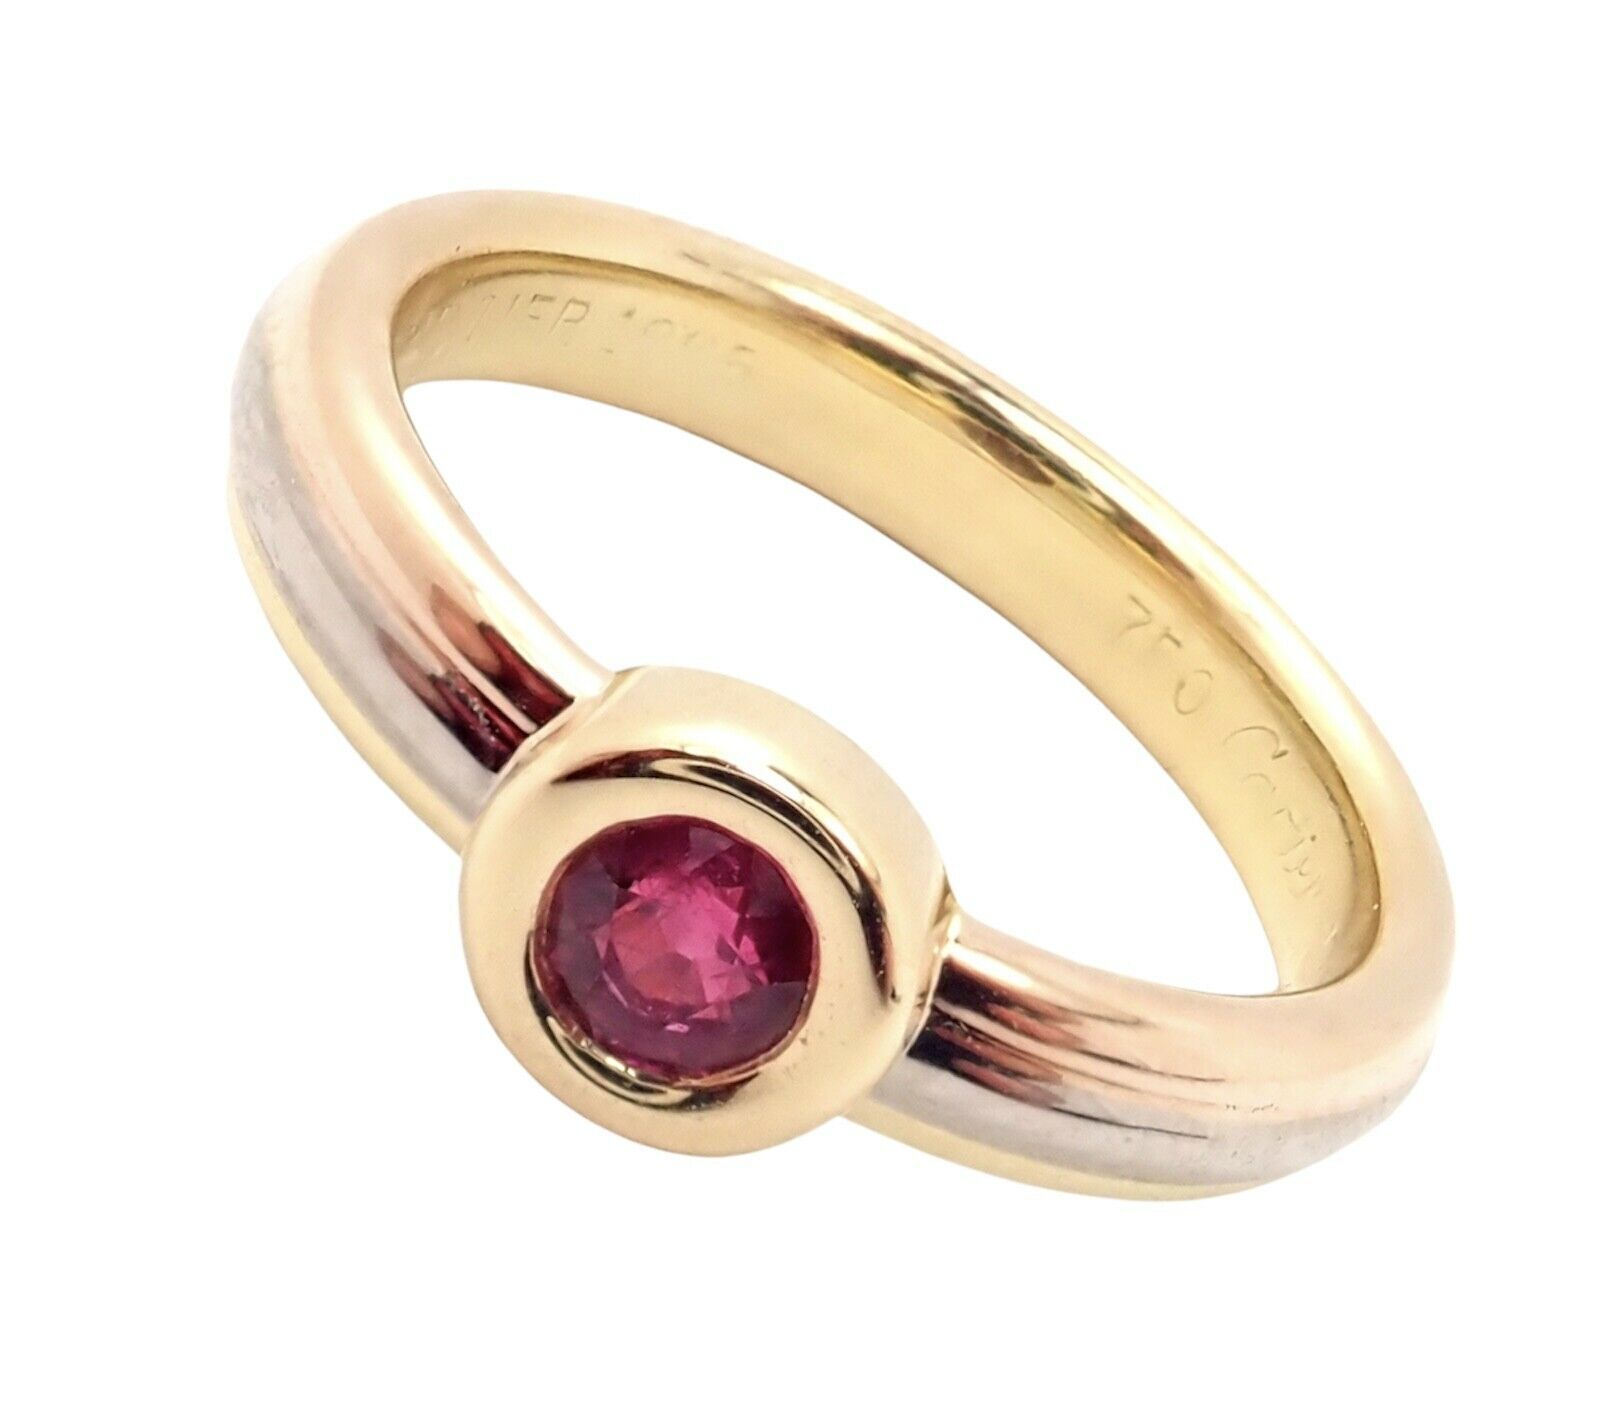 Authentic! Cartier 18k Tricolor Gold Ruby Trinity Band Ring 1995 sz 6 - $2,000.00